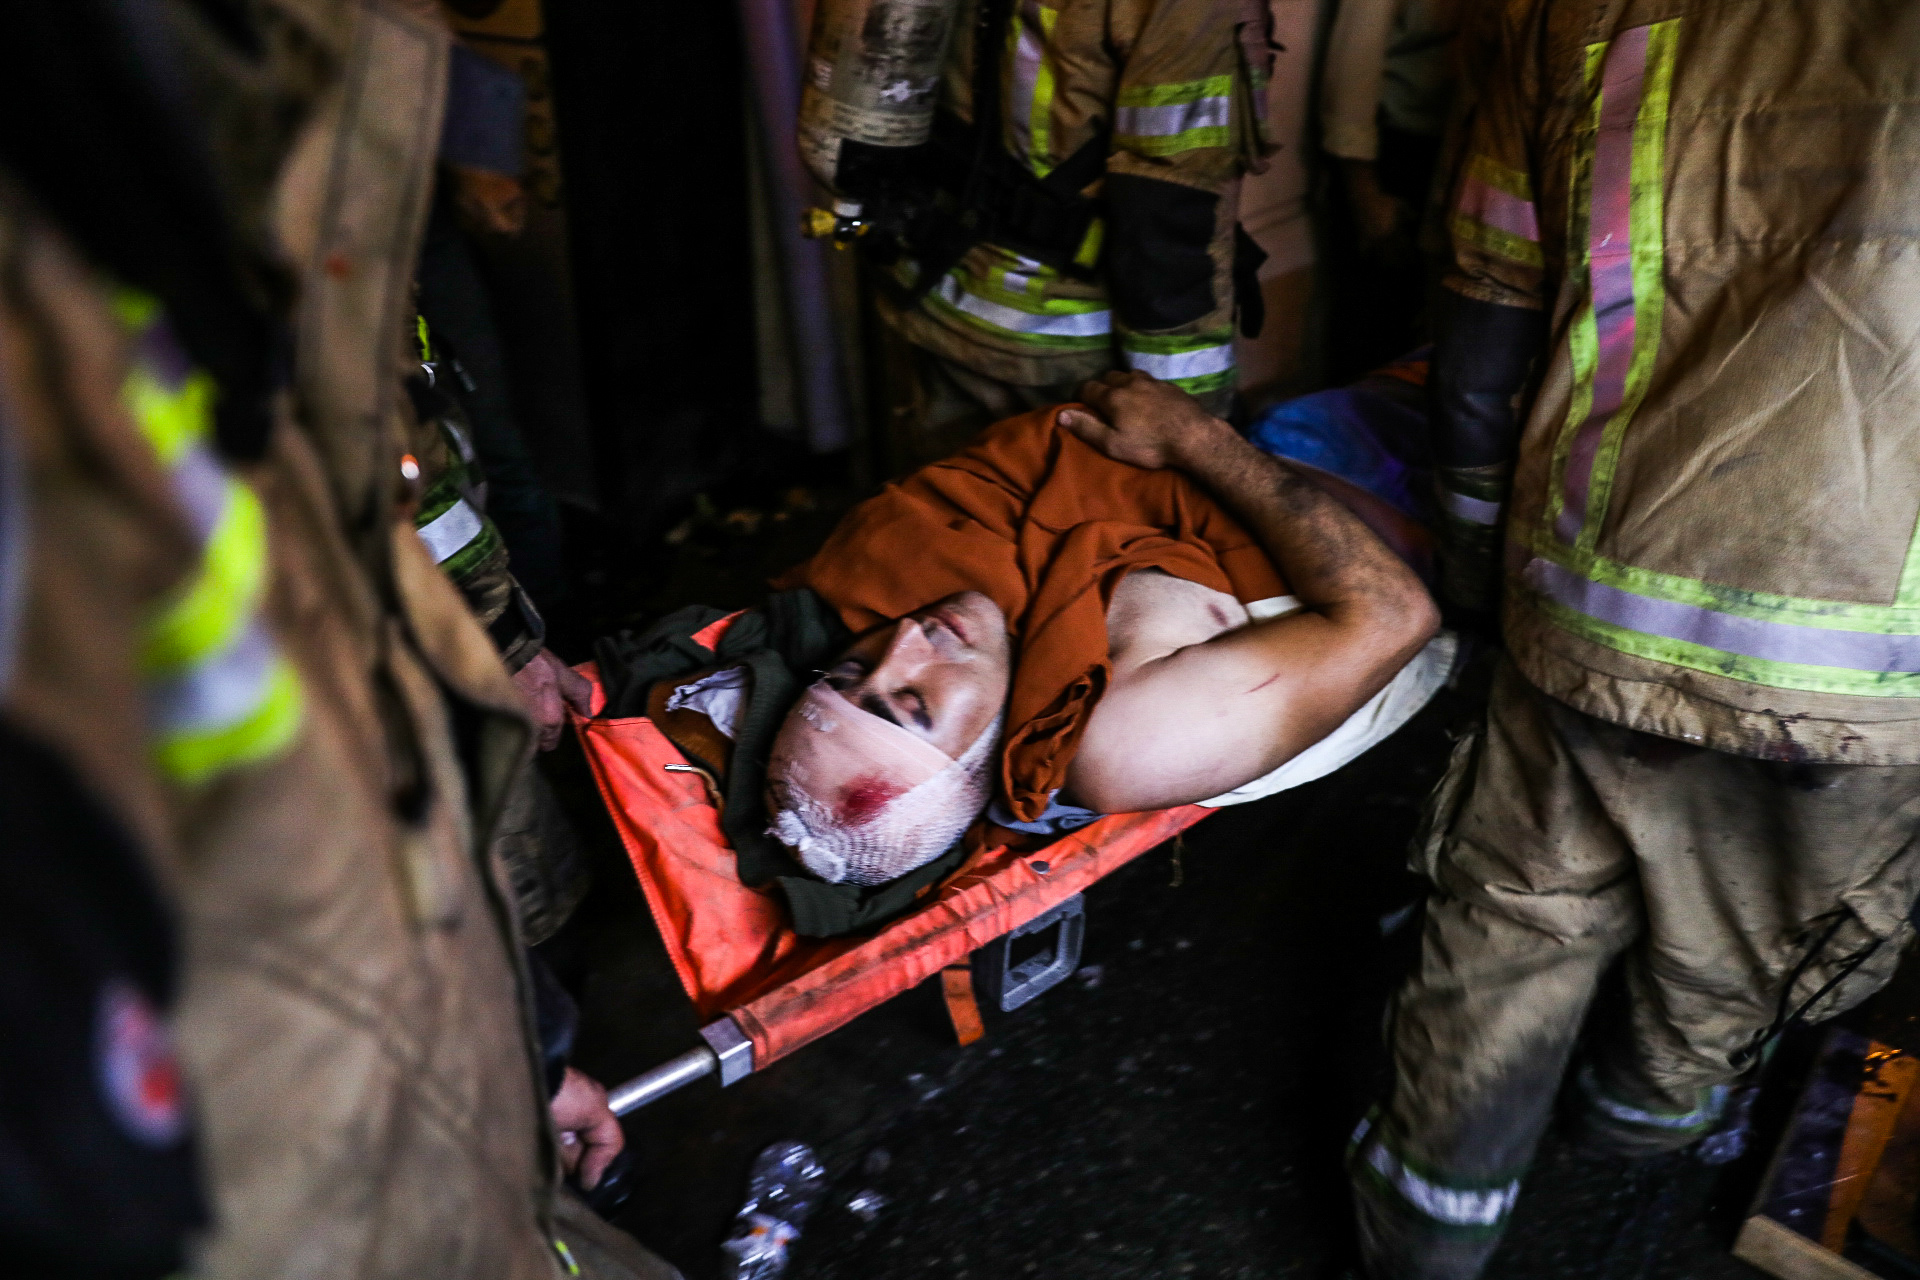 First responders carry away an injured person on a stretcher at the scene of an explosion (AFP)